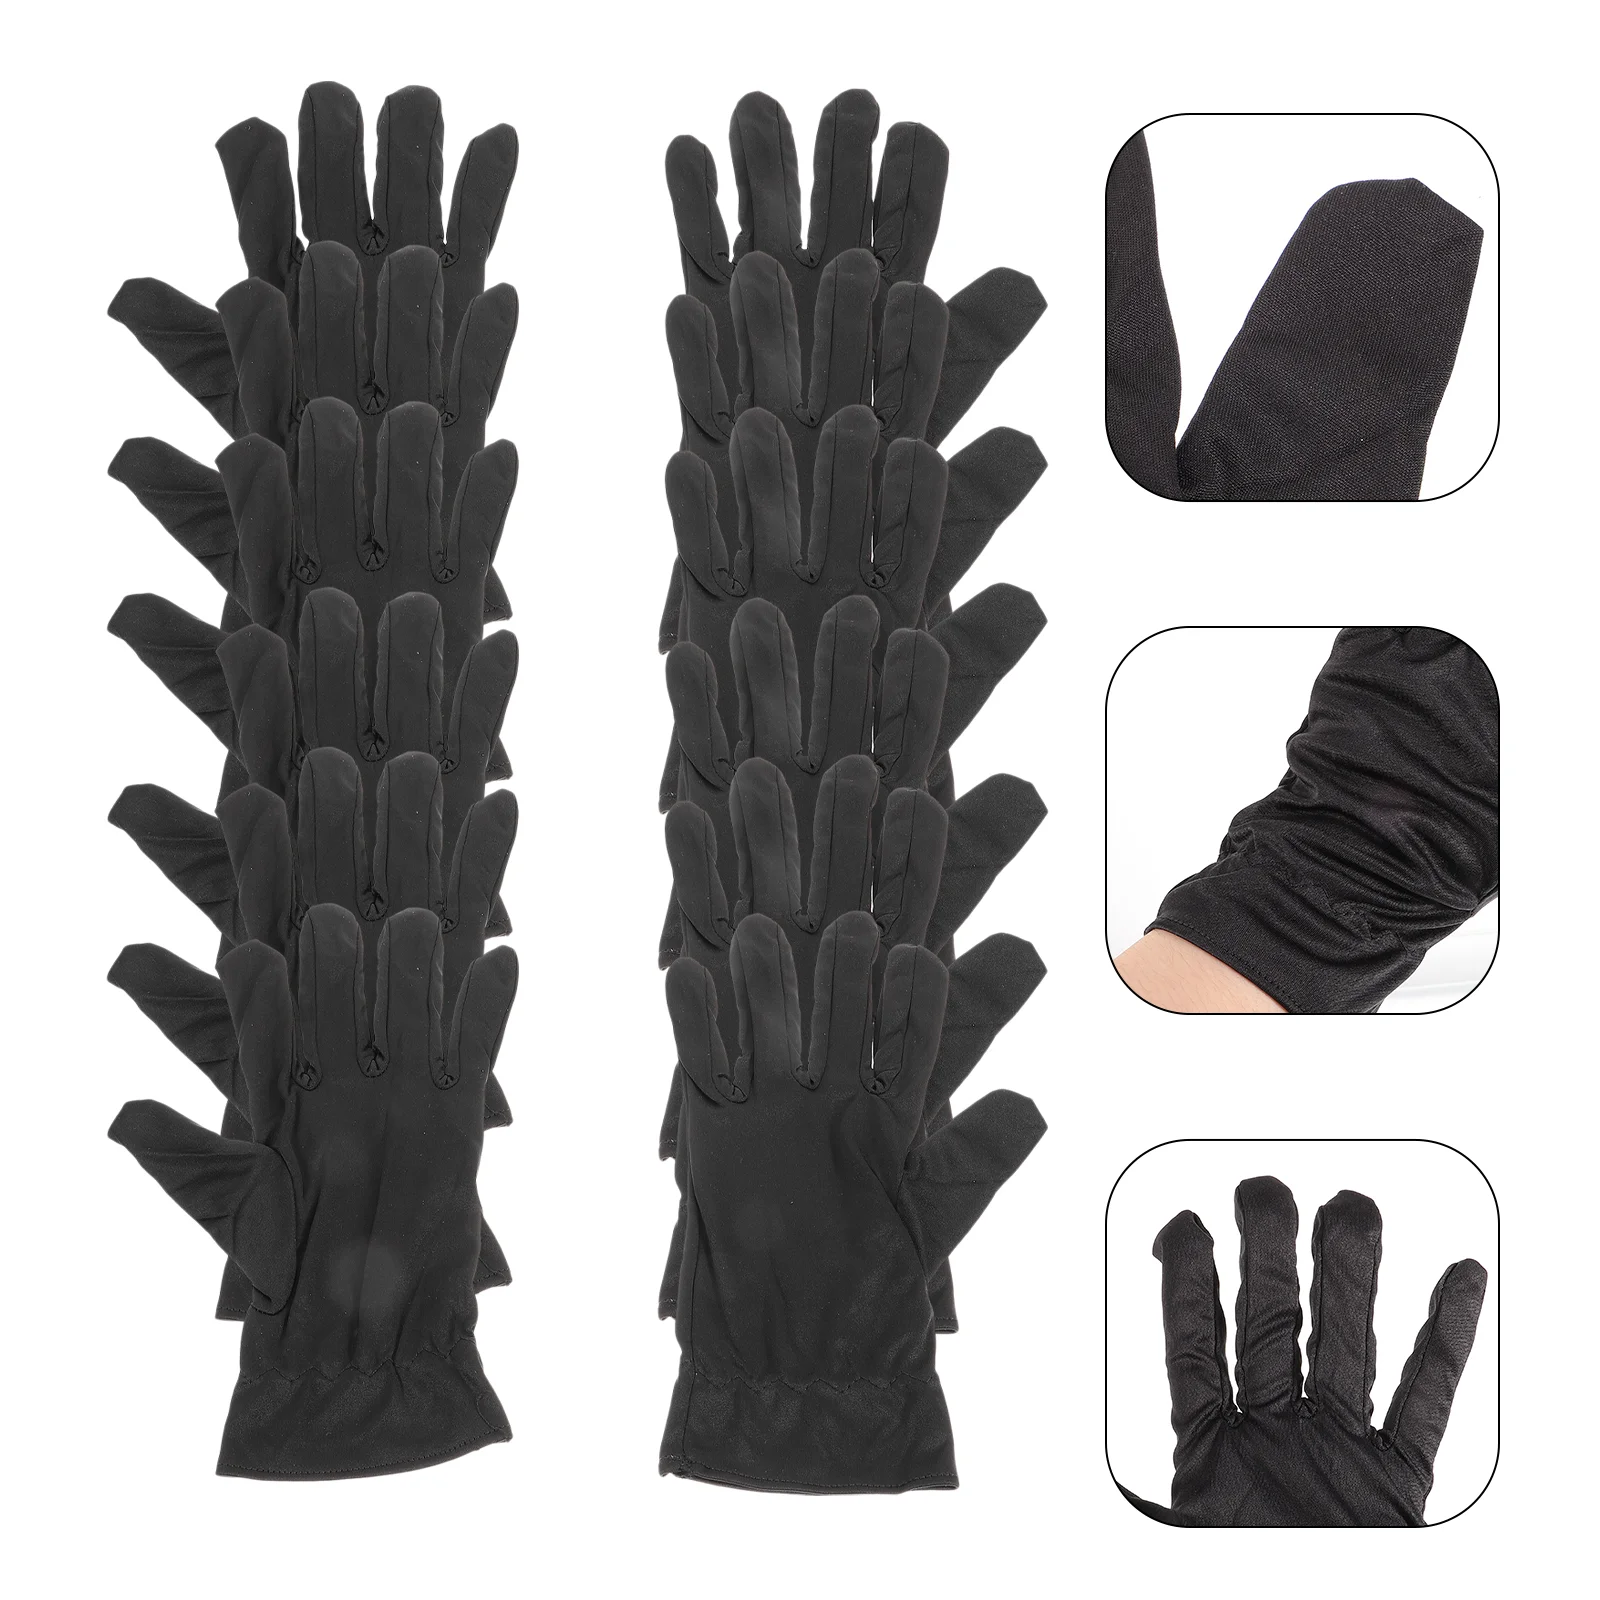 

6 Pairs Jewelry Gloves Working Men Testing Kit Black Moisturizing Women Cotton Coin Handling Inspection Miss For